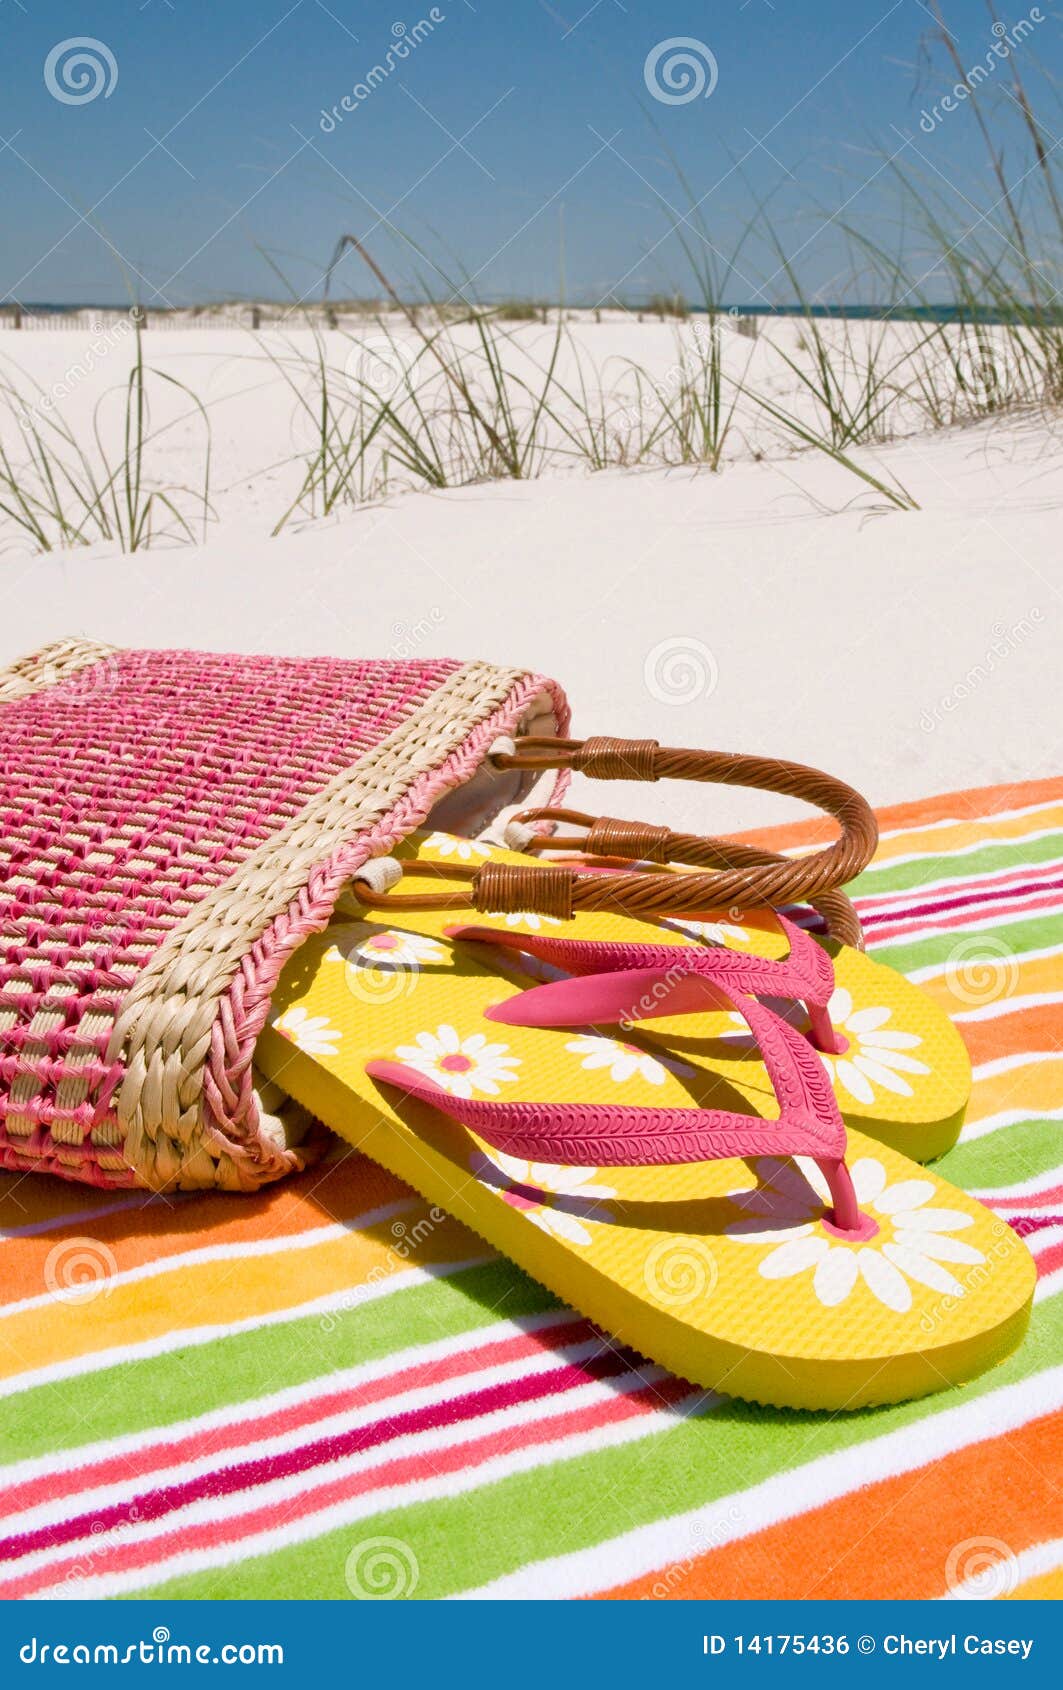 Beach sandals on sand stock photo. Image of purse, straw - 14175436